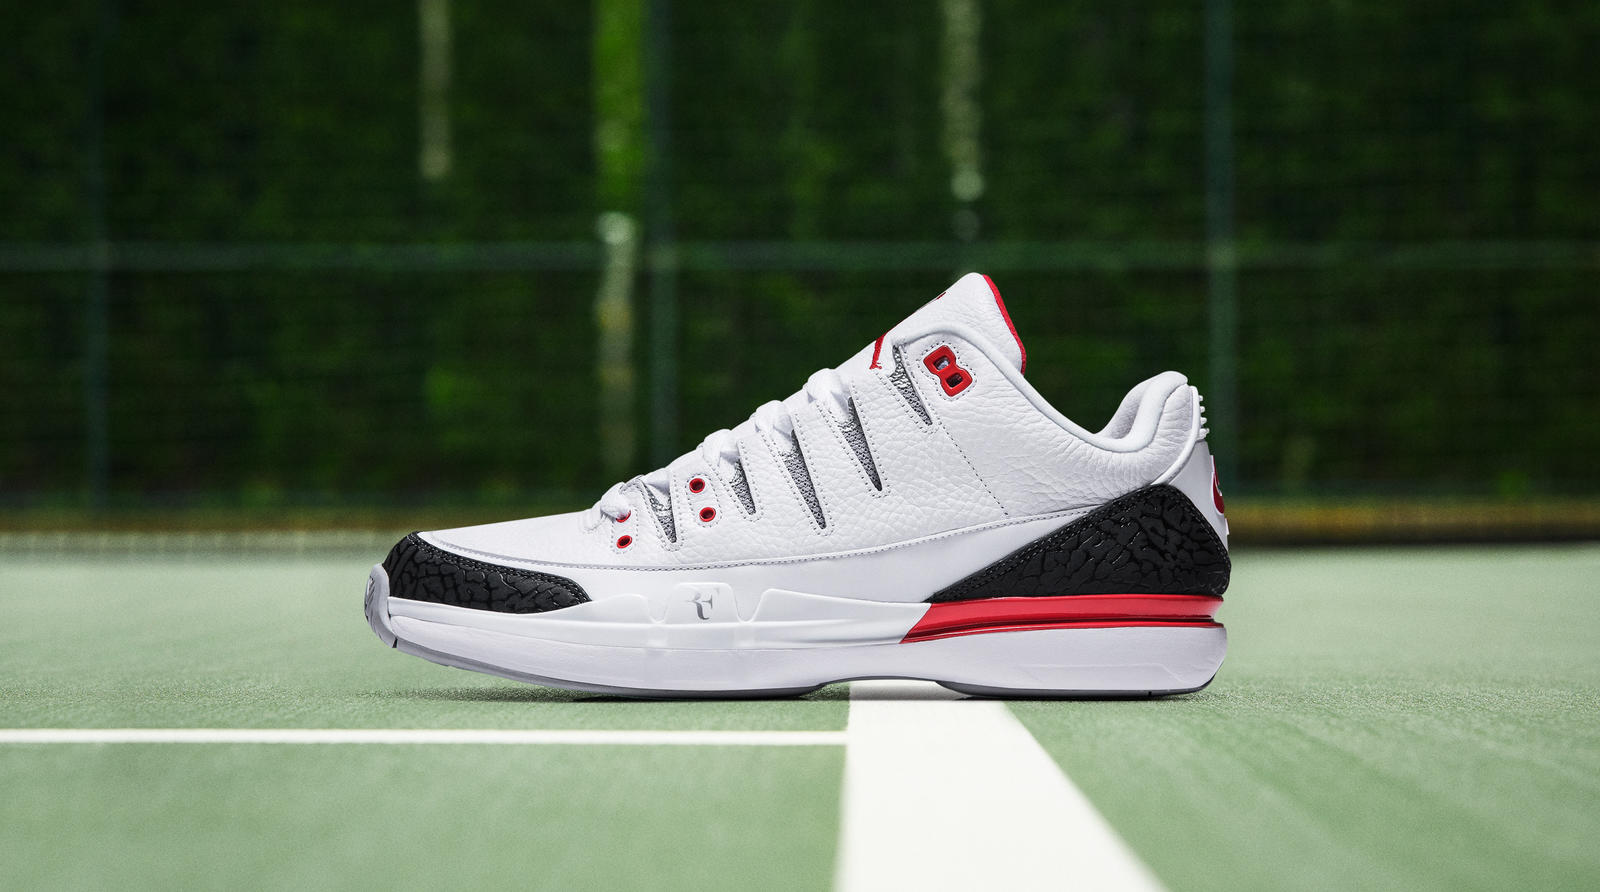 The Nike Zoom Vapor RF x Air Jordan 3 is Coming Back in 'Fire Red' -  WearTesters